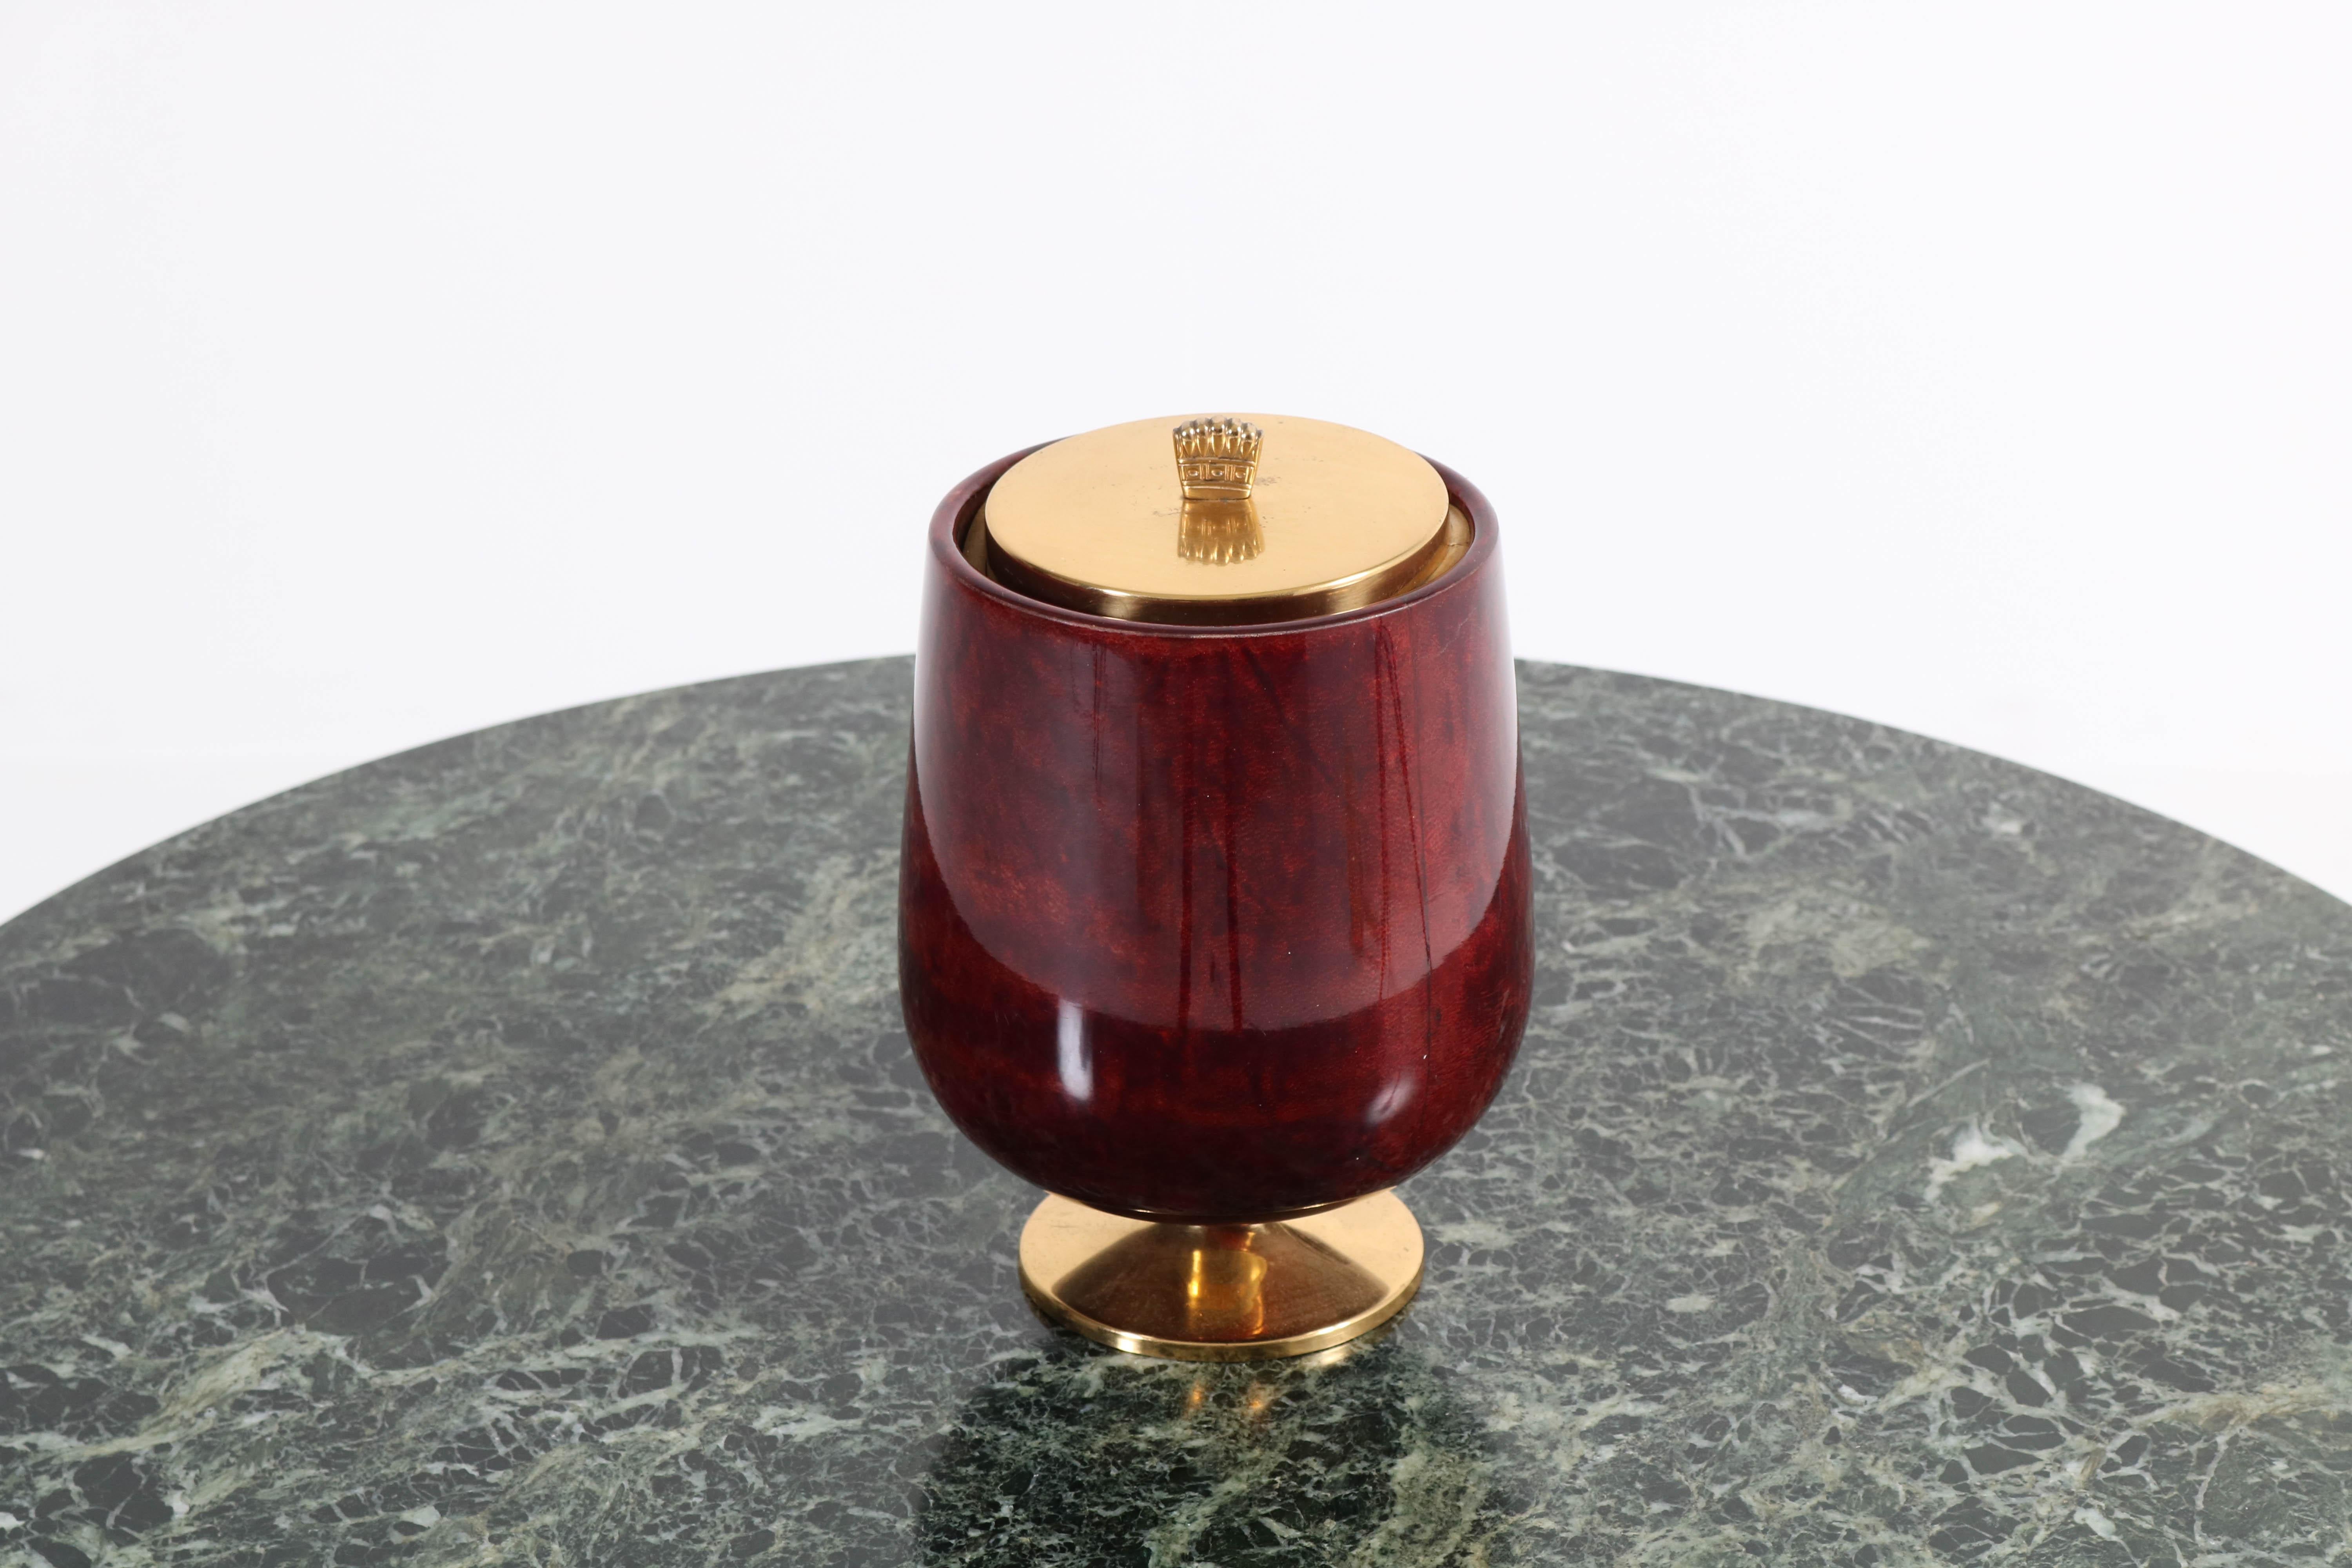 Stunning Mid-Century Modern ice bucket.
Design by Aldo Tura.
Striking Italian design from the 1950s.
Burgundy red lacquered goatskin and brass.
In good original condition with minor wear consistent with age and use,
preserving a beautiful